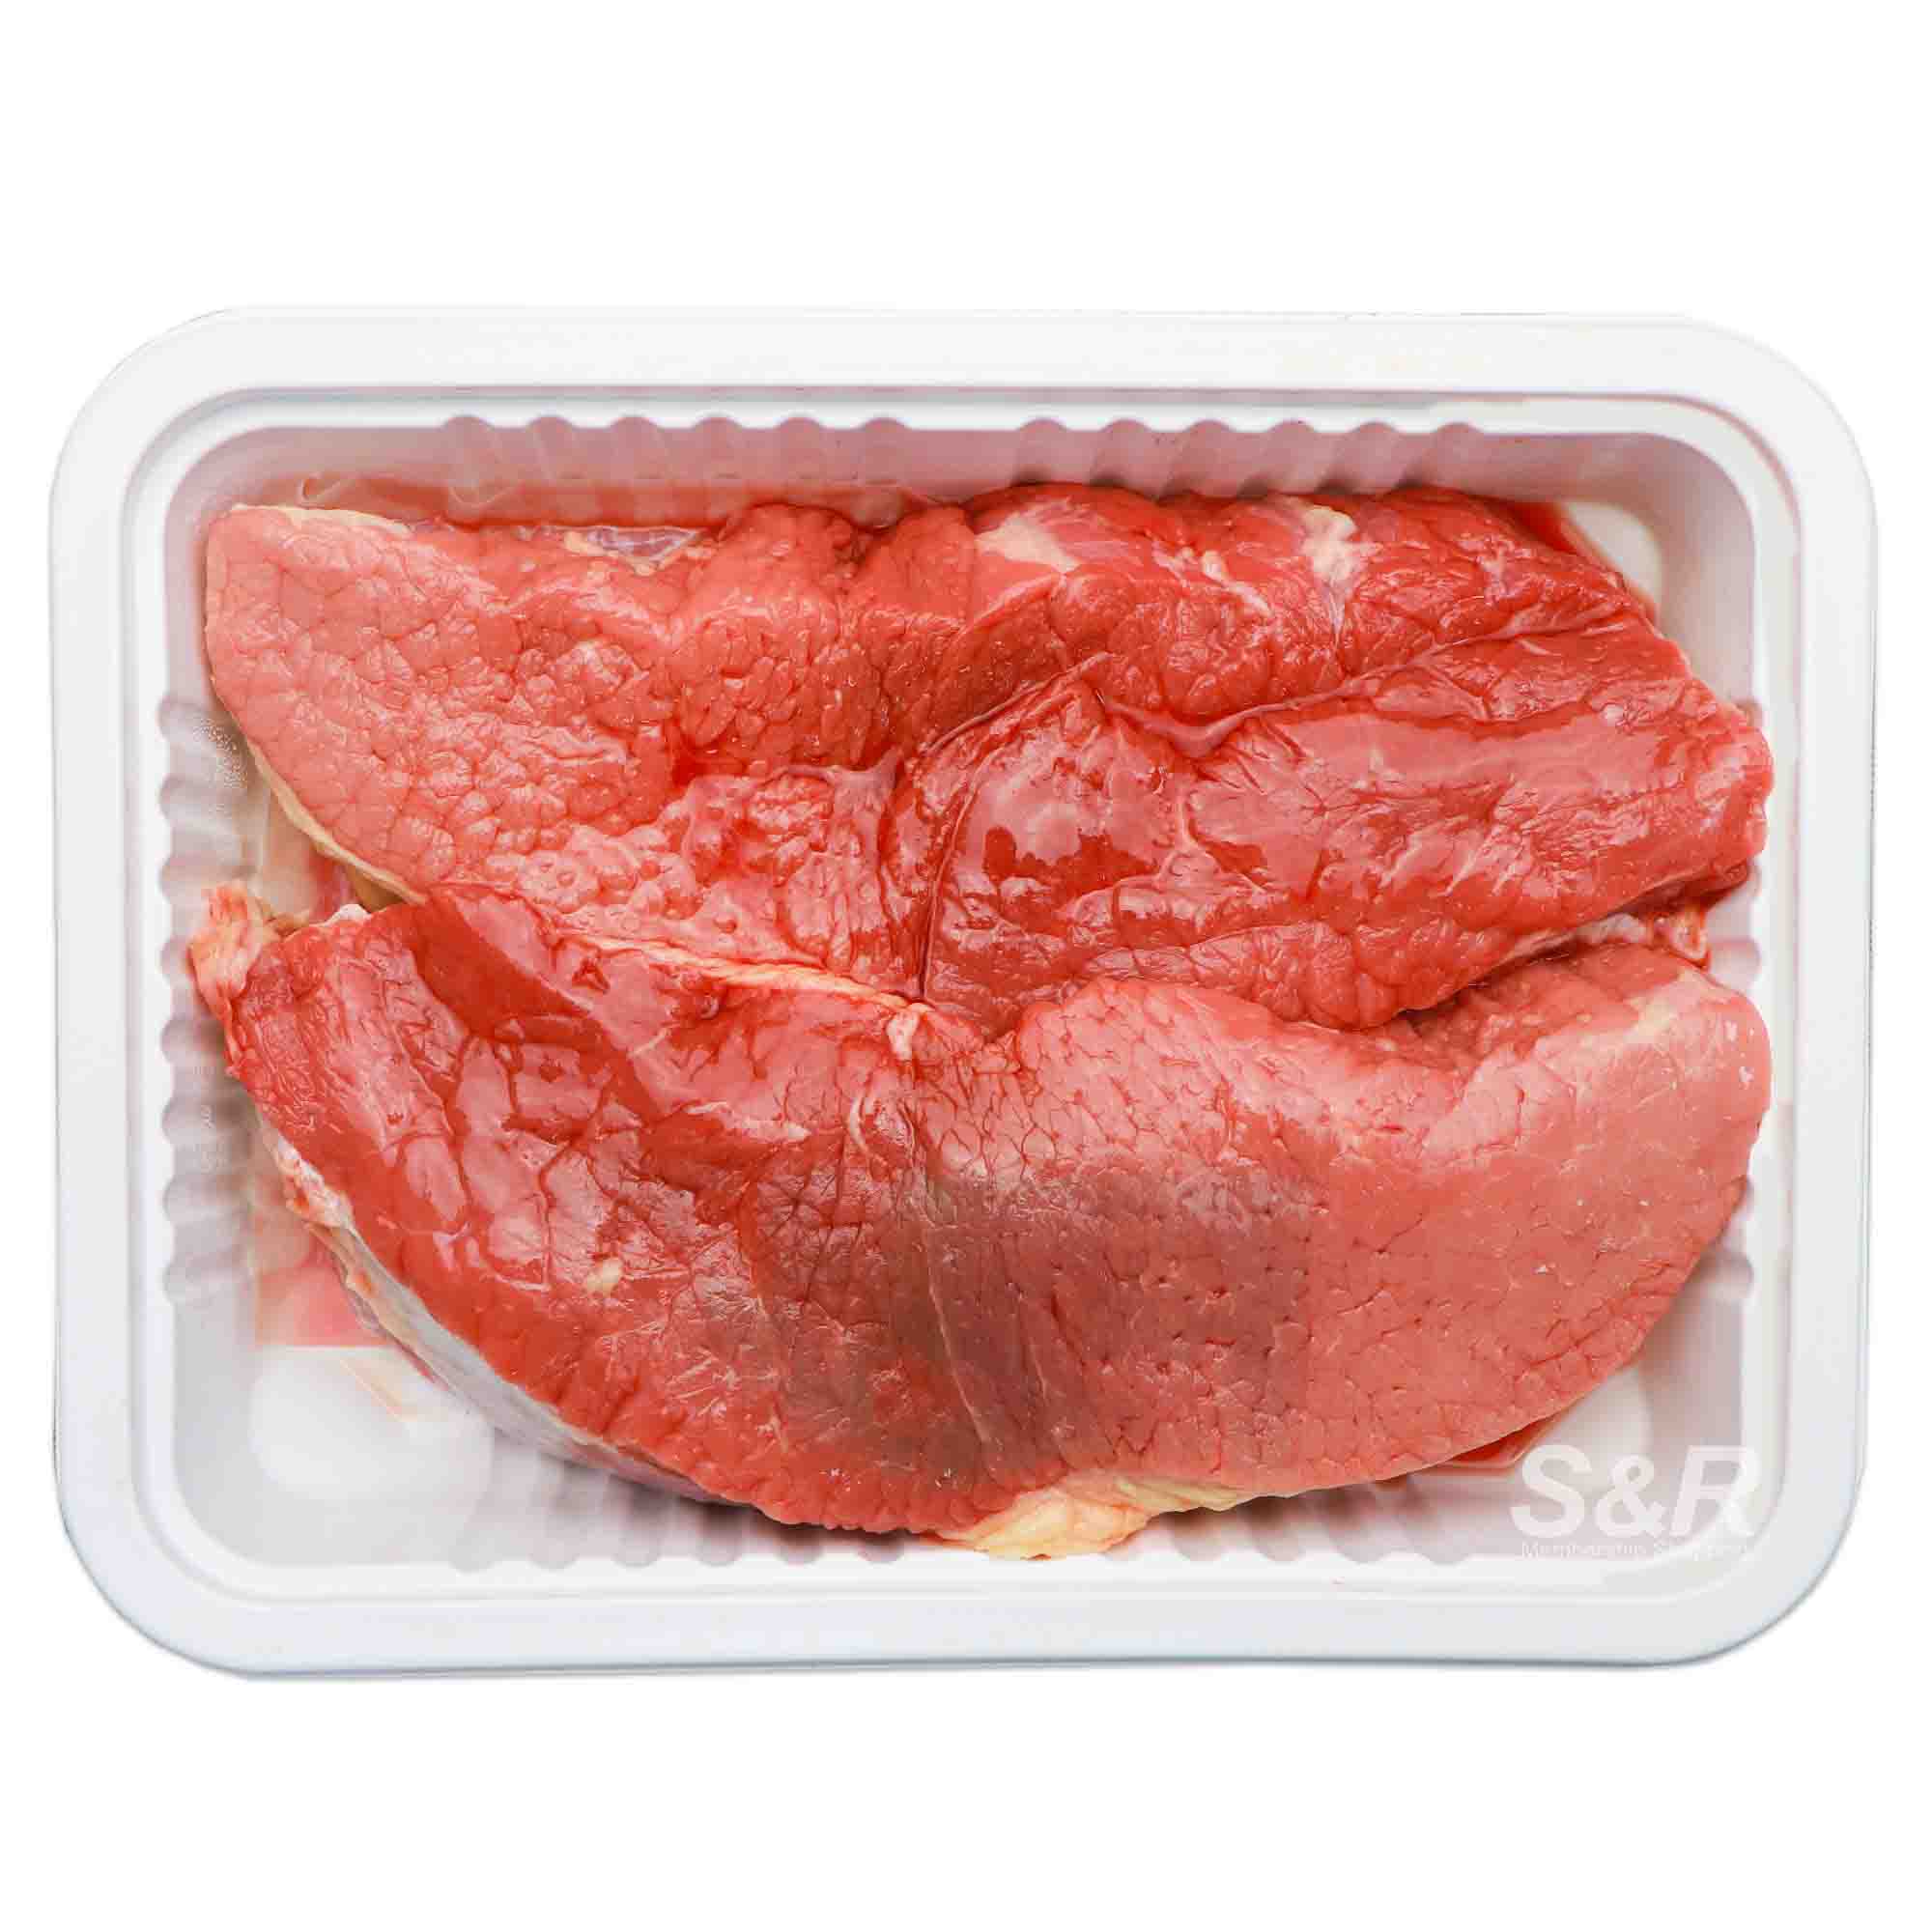 S&R Whole Beef Bottom Round approx. 2kg